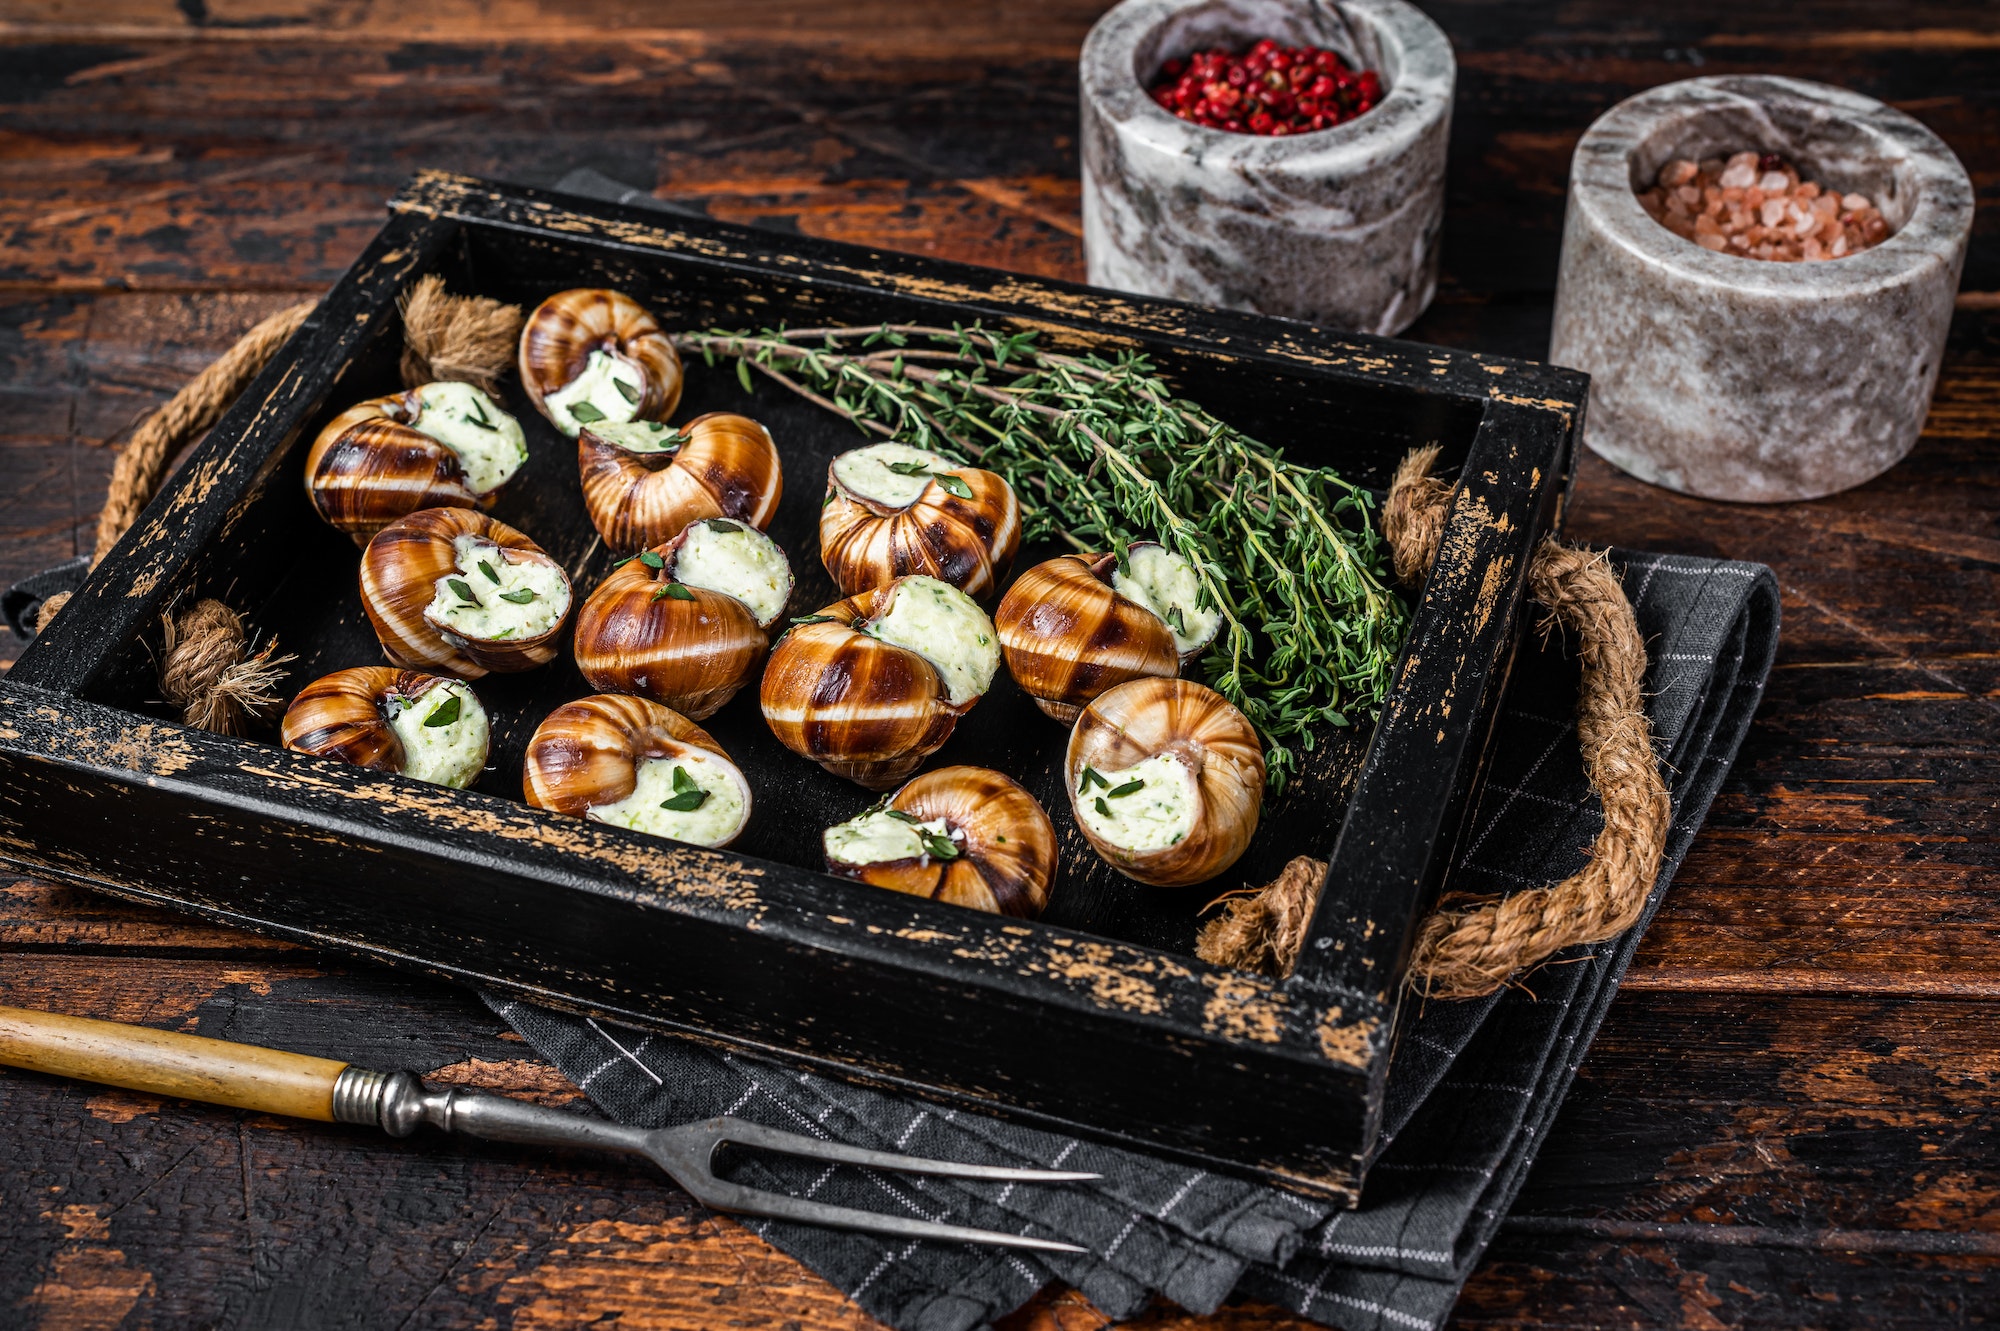 French gourmet - Escargot Snails with garlic butter in a wooden tray. Wooden background. Top view